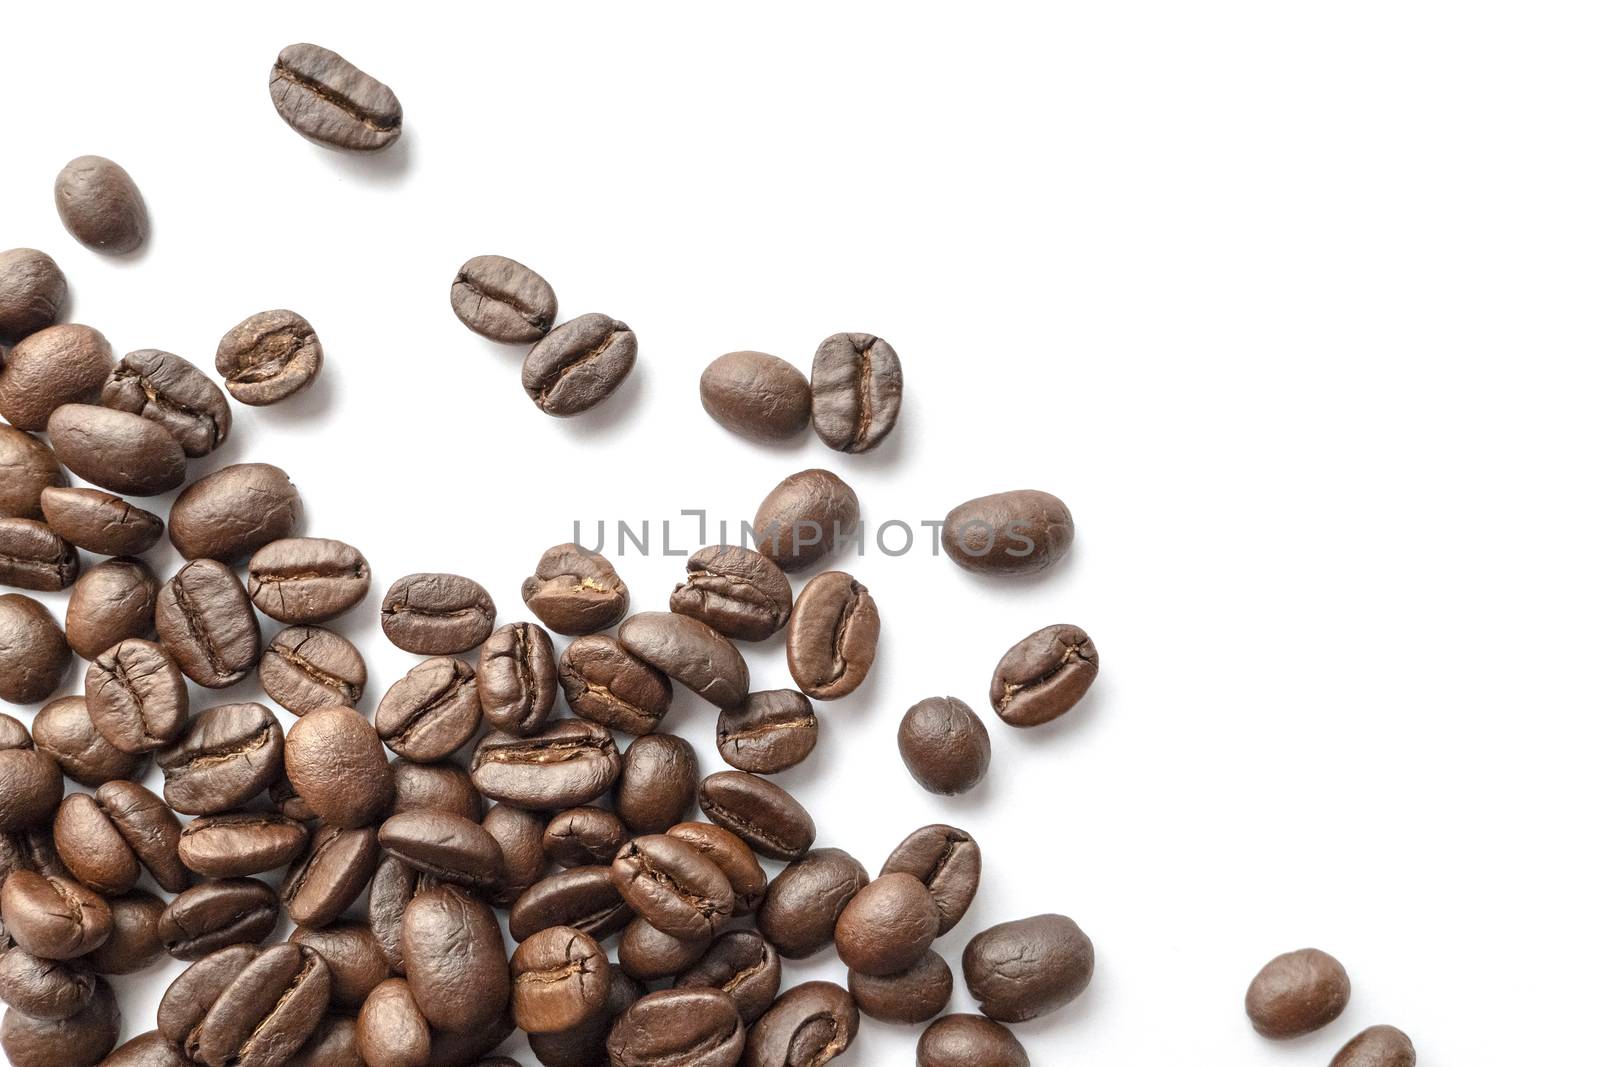 Roasted coffee beans isolated on white background. Close-up image.